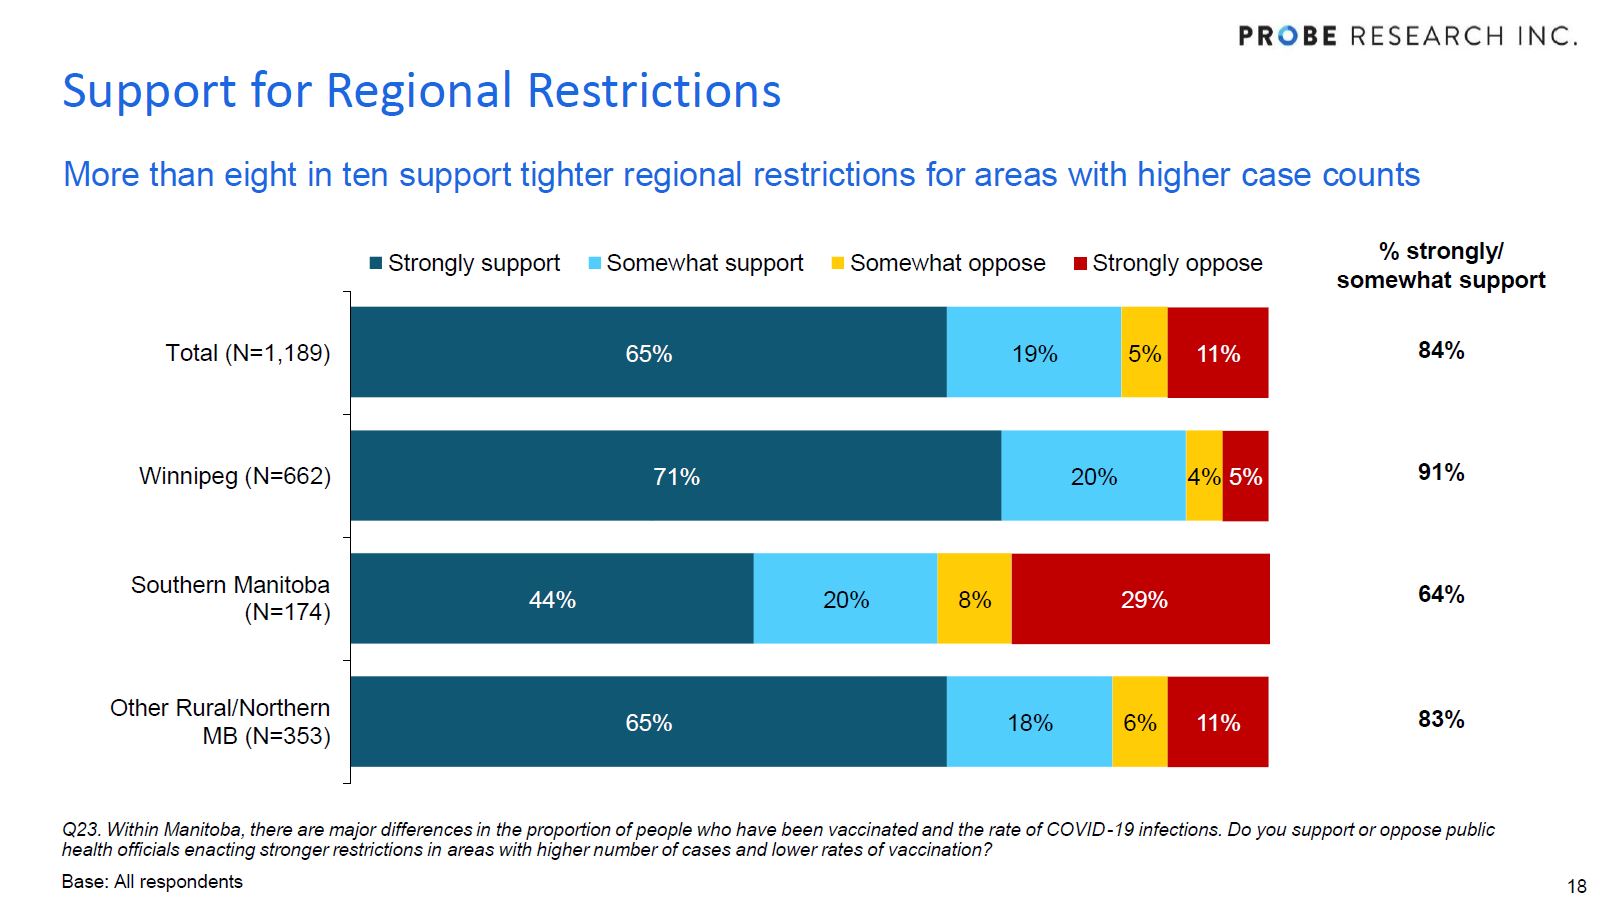 support for regional restrictions in Manitoba